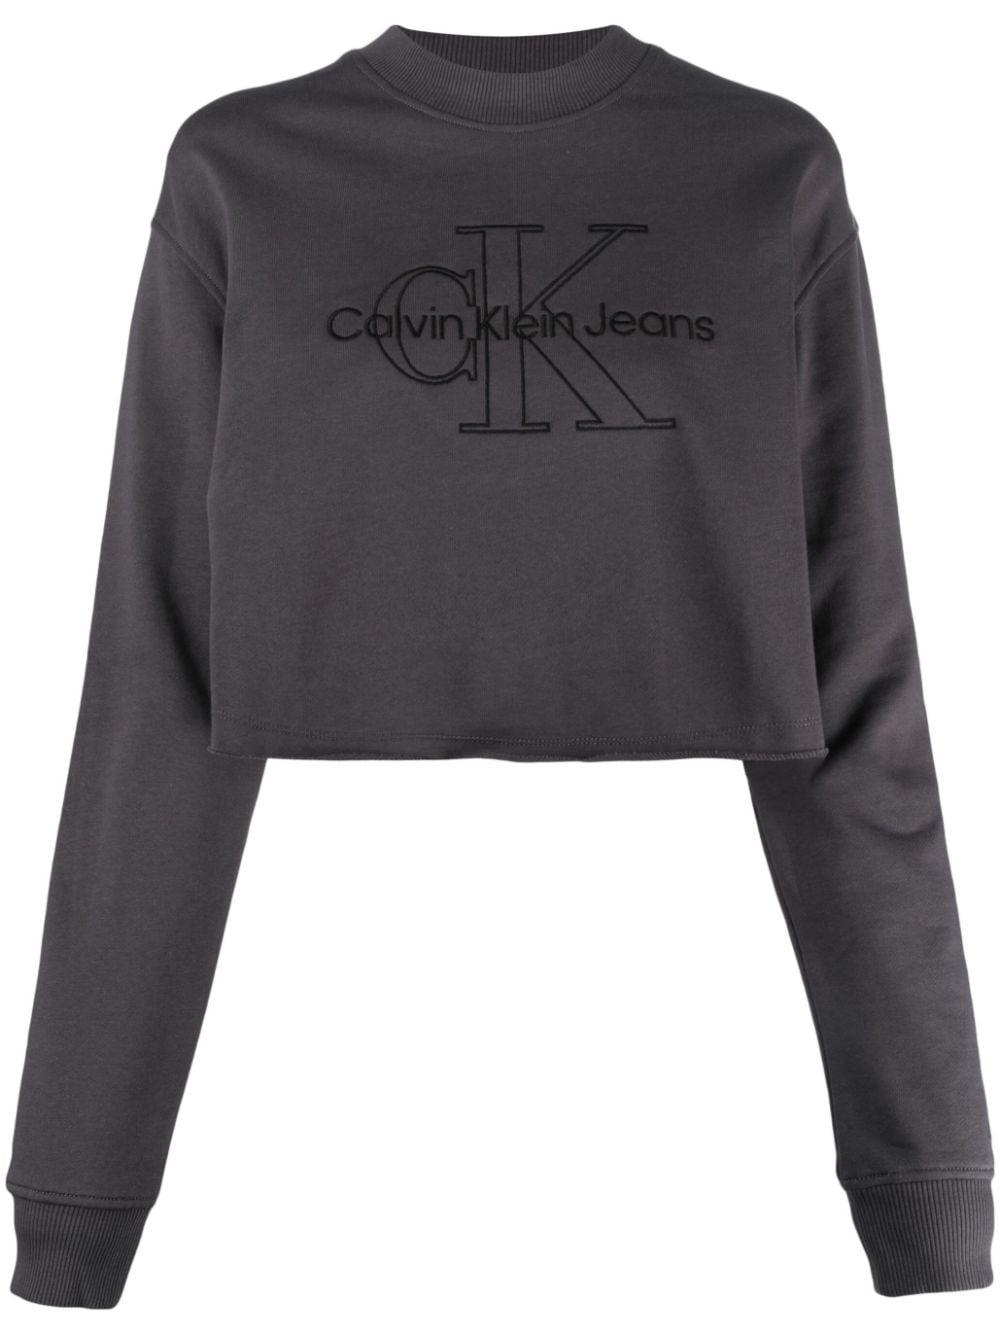 Image 1 of Calvin Klein Jeans monogram-embroidered cropped sweatshirt